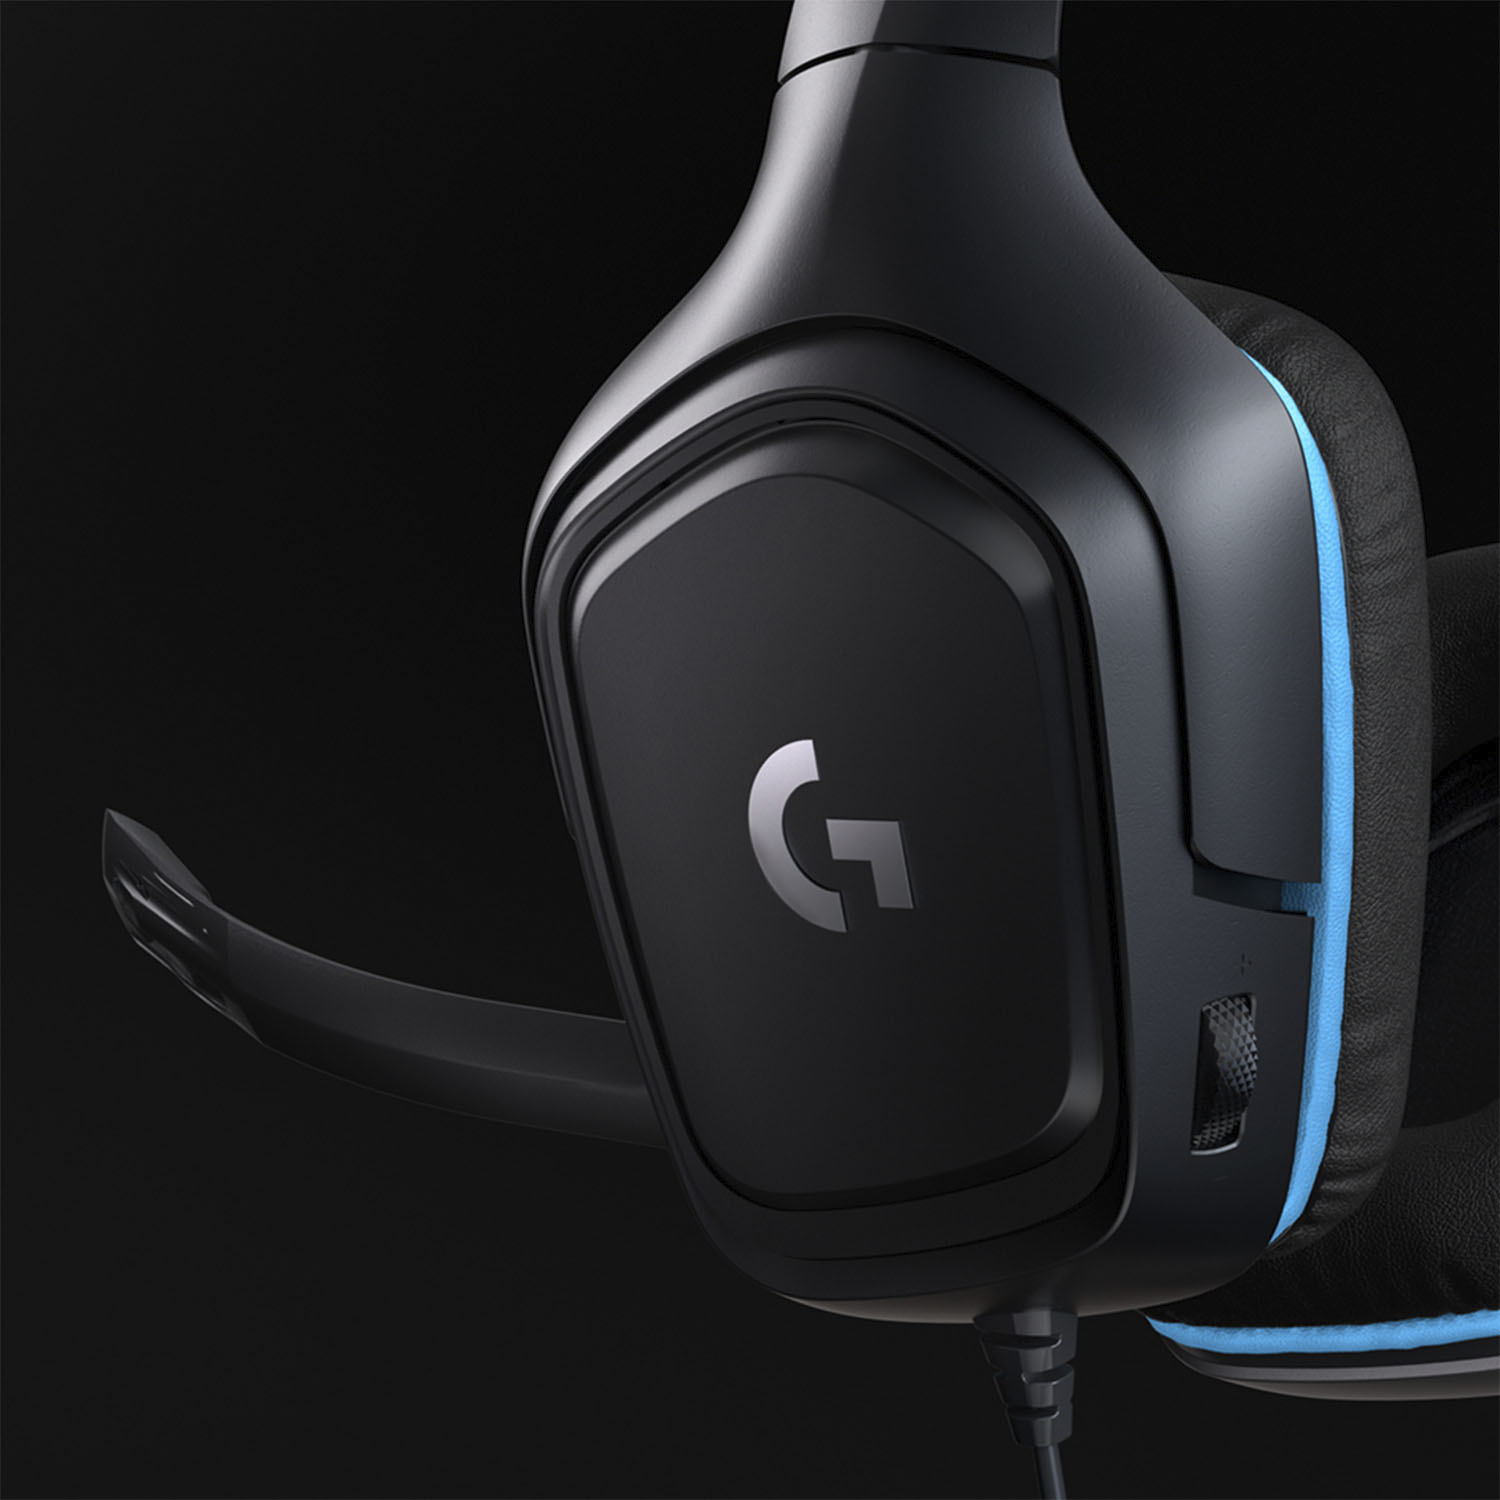 Logitech G432 Wired Gaming Headset for PC Black/Blue 981-000769 - Best Buy